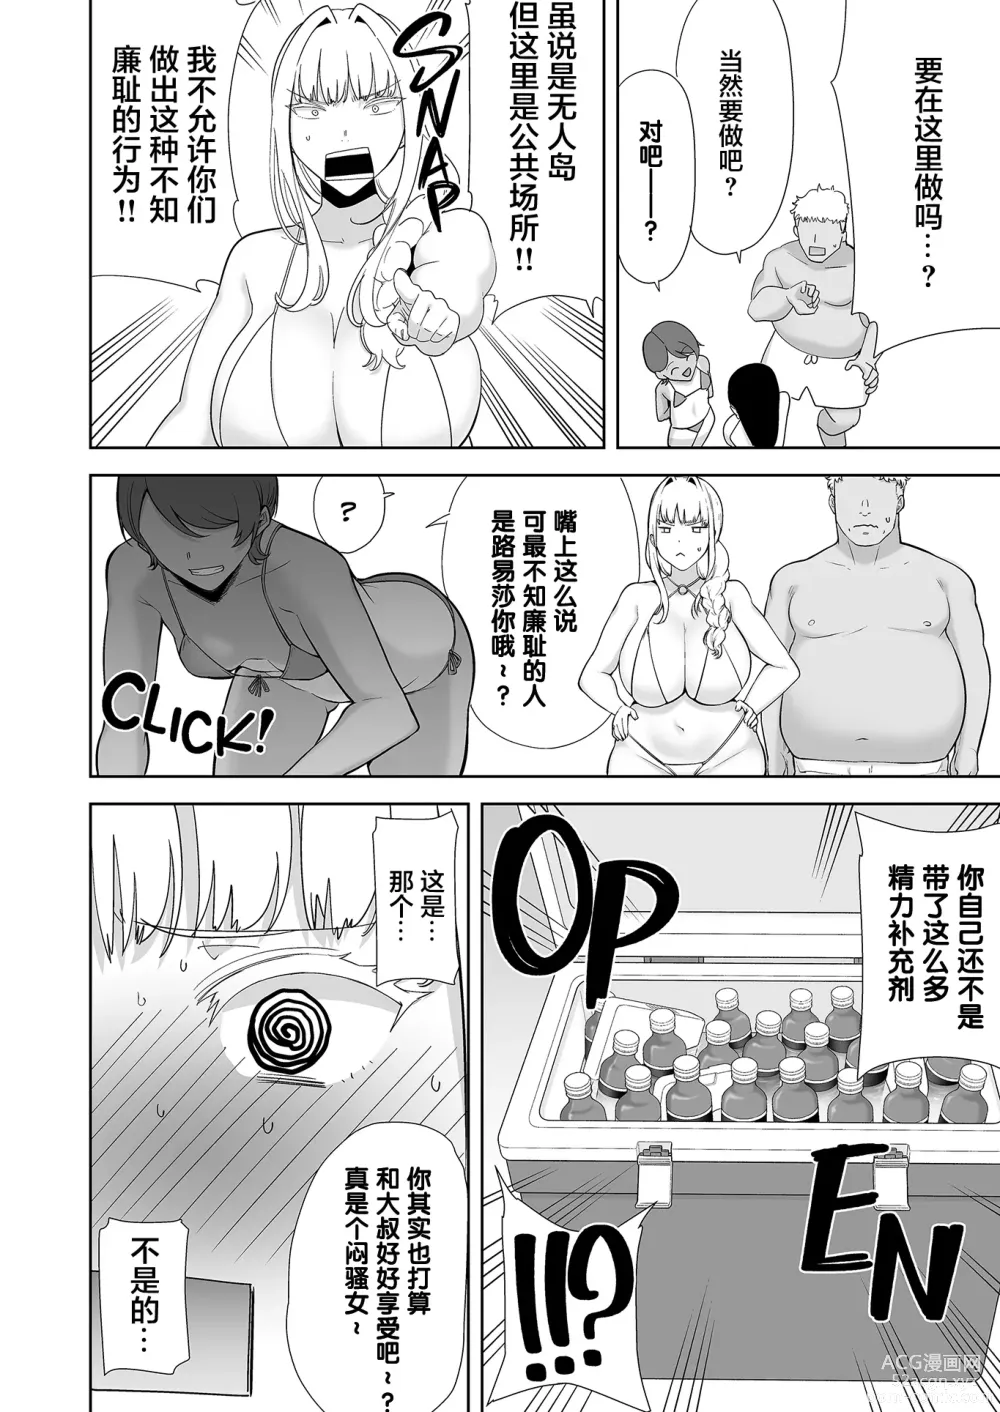 Page 12 of doujinshi 聖華女学院高等部公認竿おじさん 6